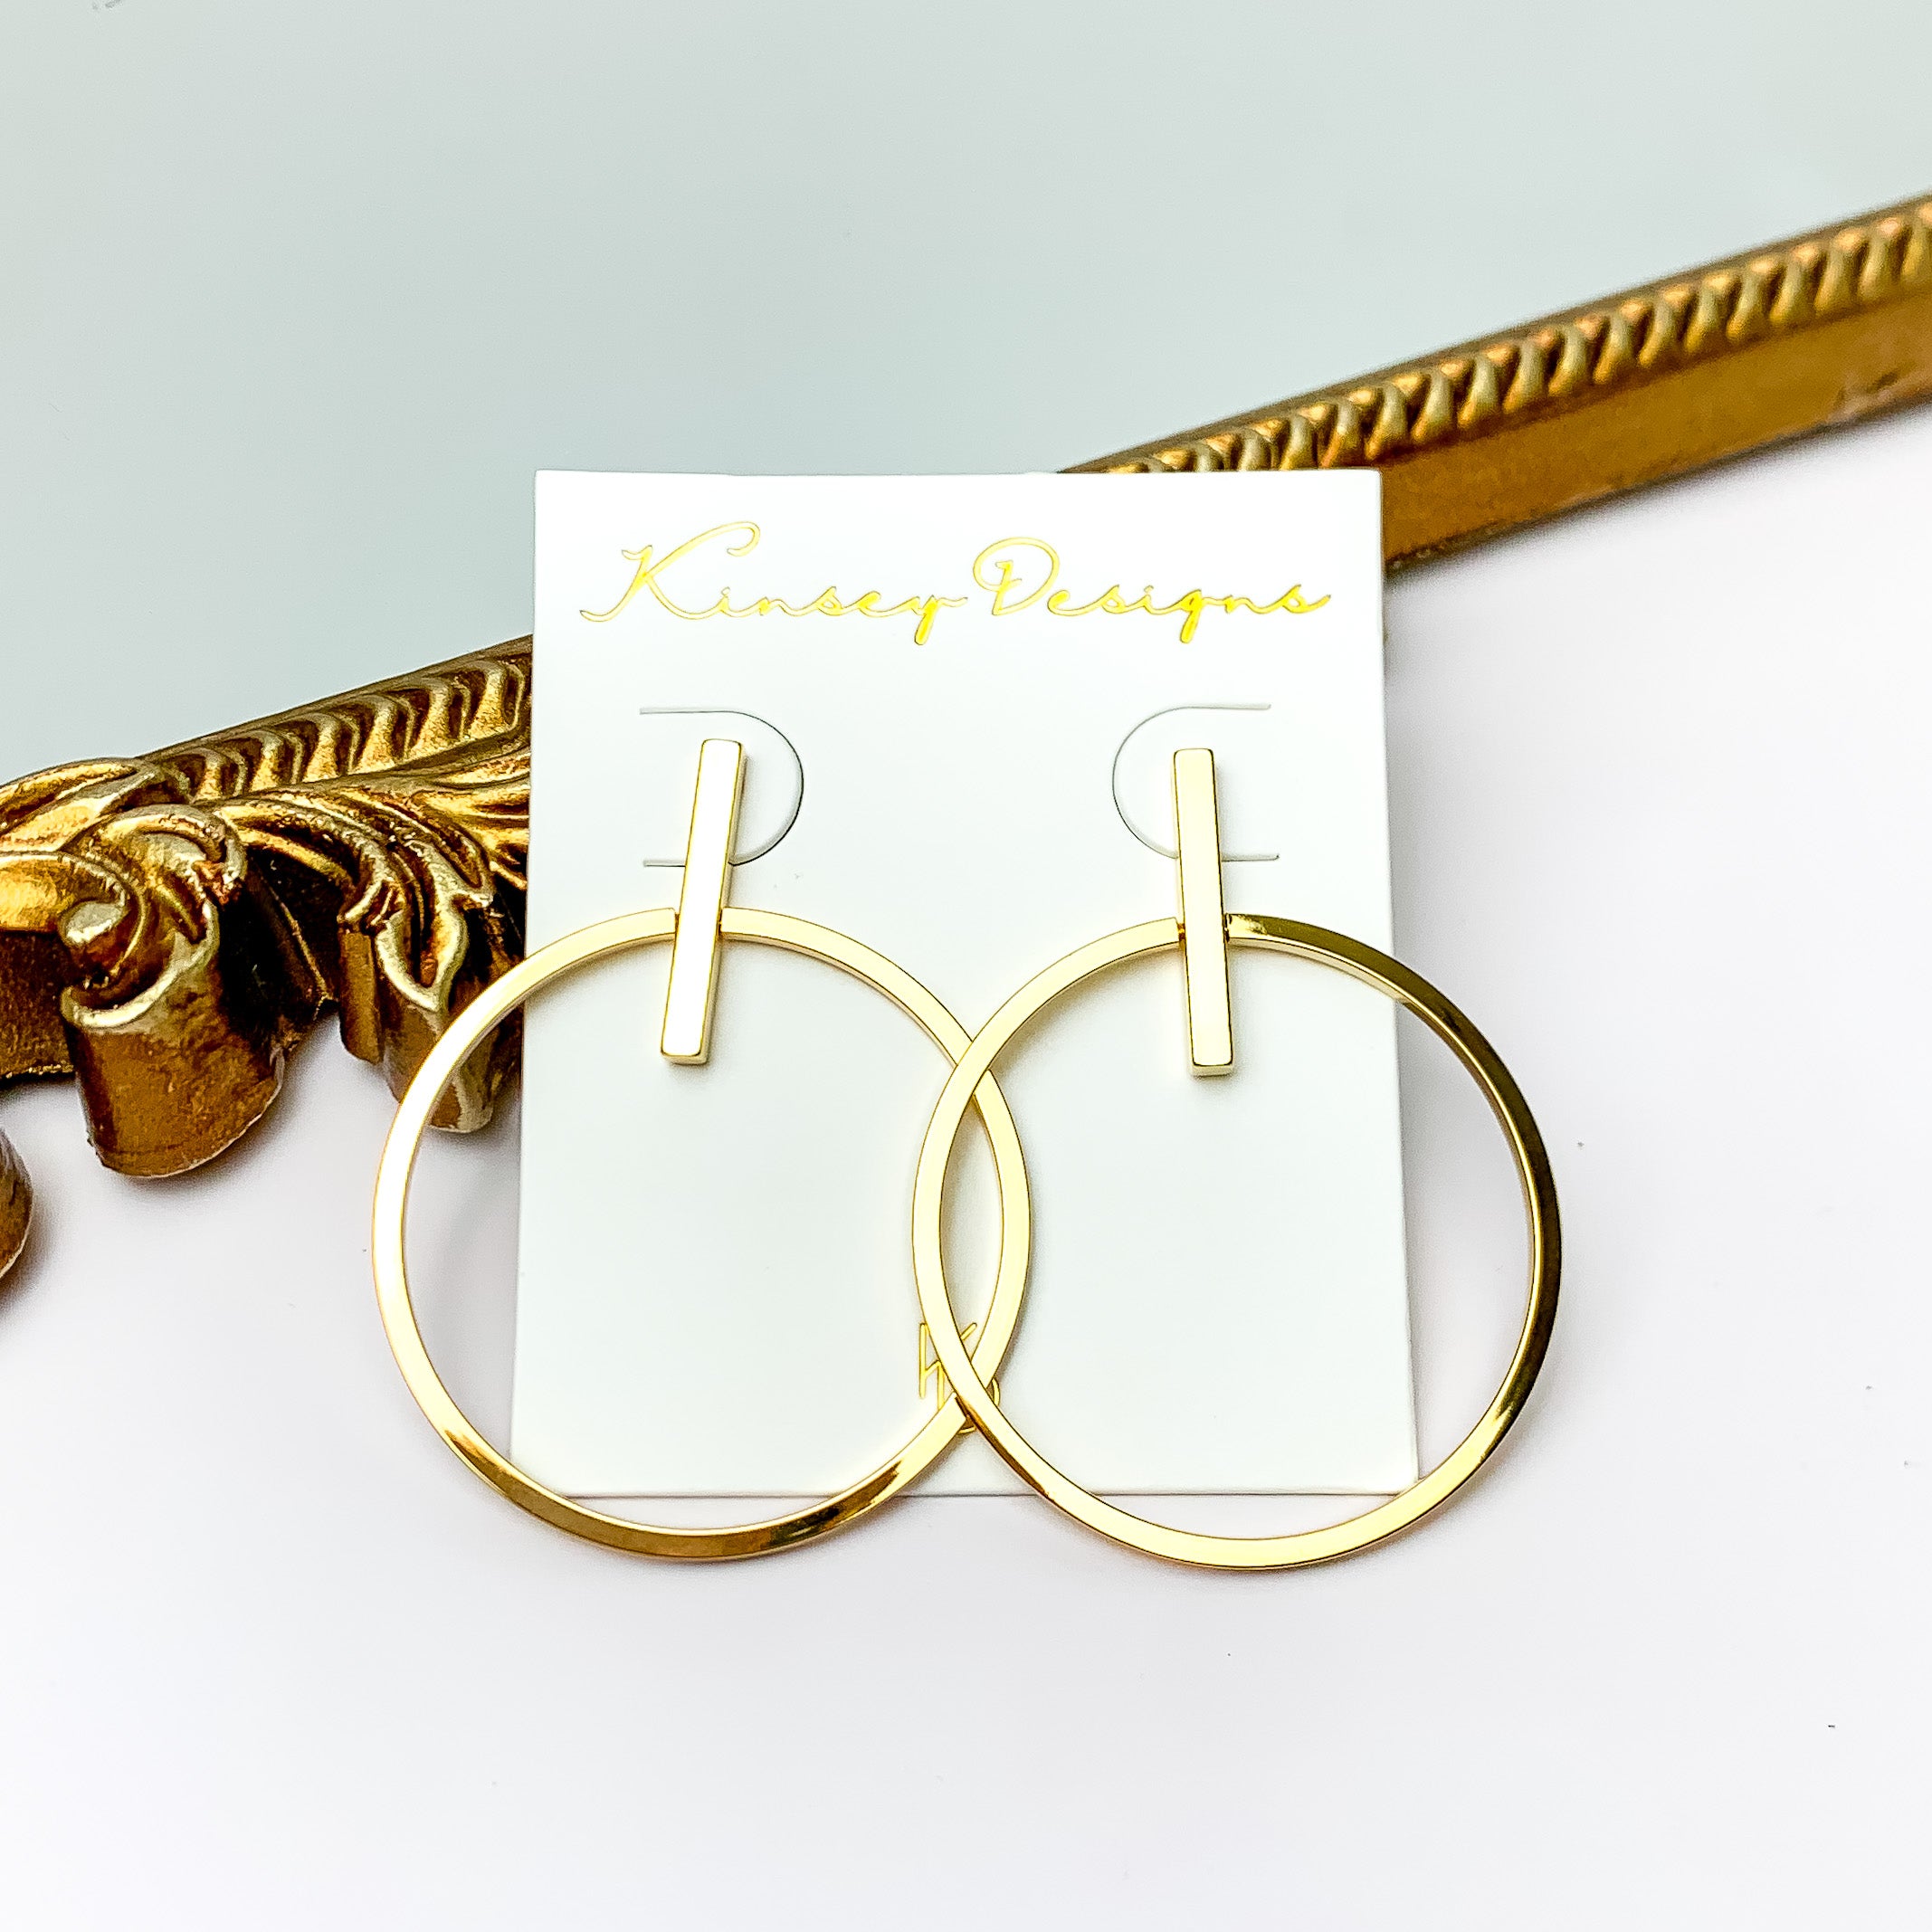 A pair of gold hoop earrings with a rectangle bar post back. These earrings are pictured in front of a gold mirror on a white background.  